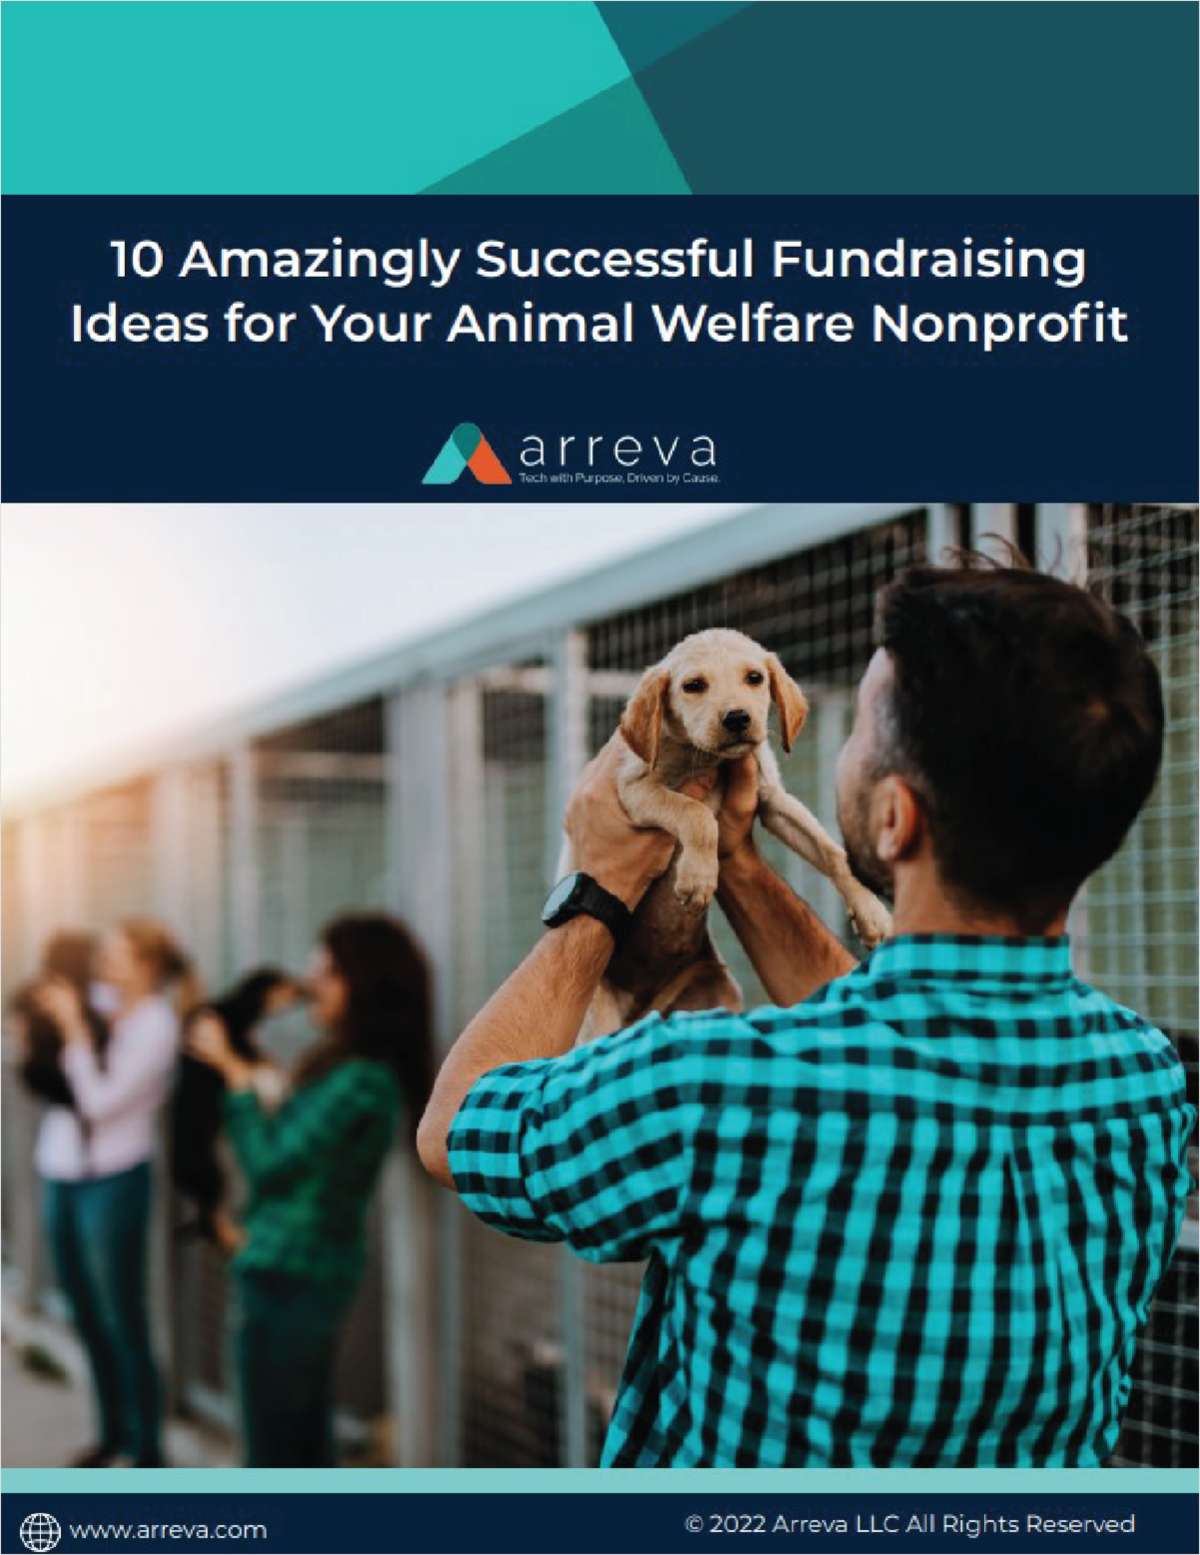 10 Amazingly Successful Fundraising Ideas for Your Animal Welfare Nonprofit